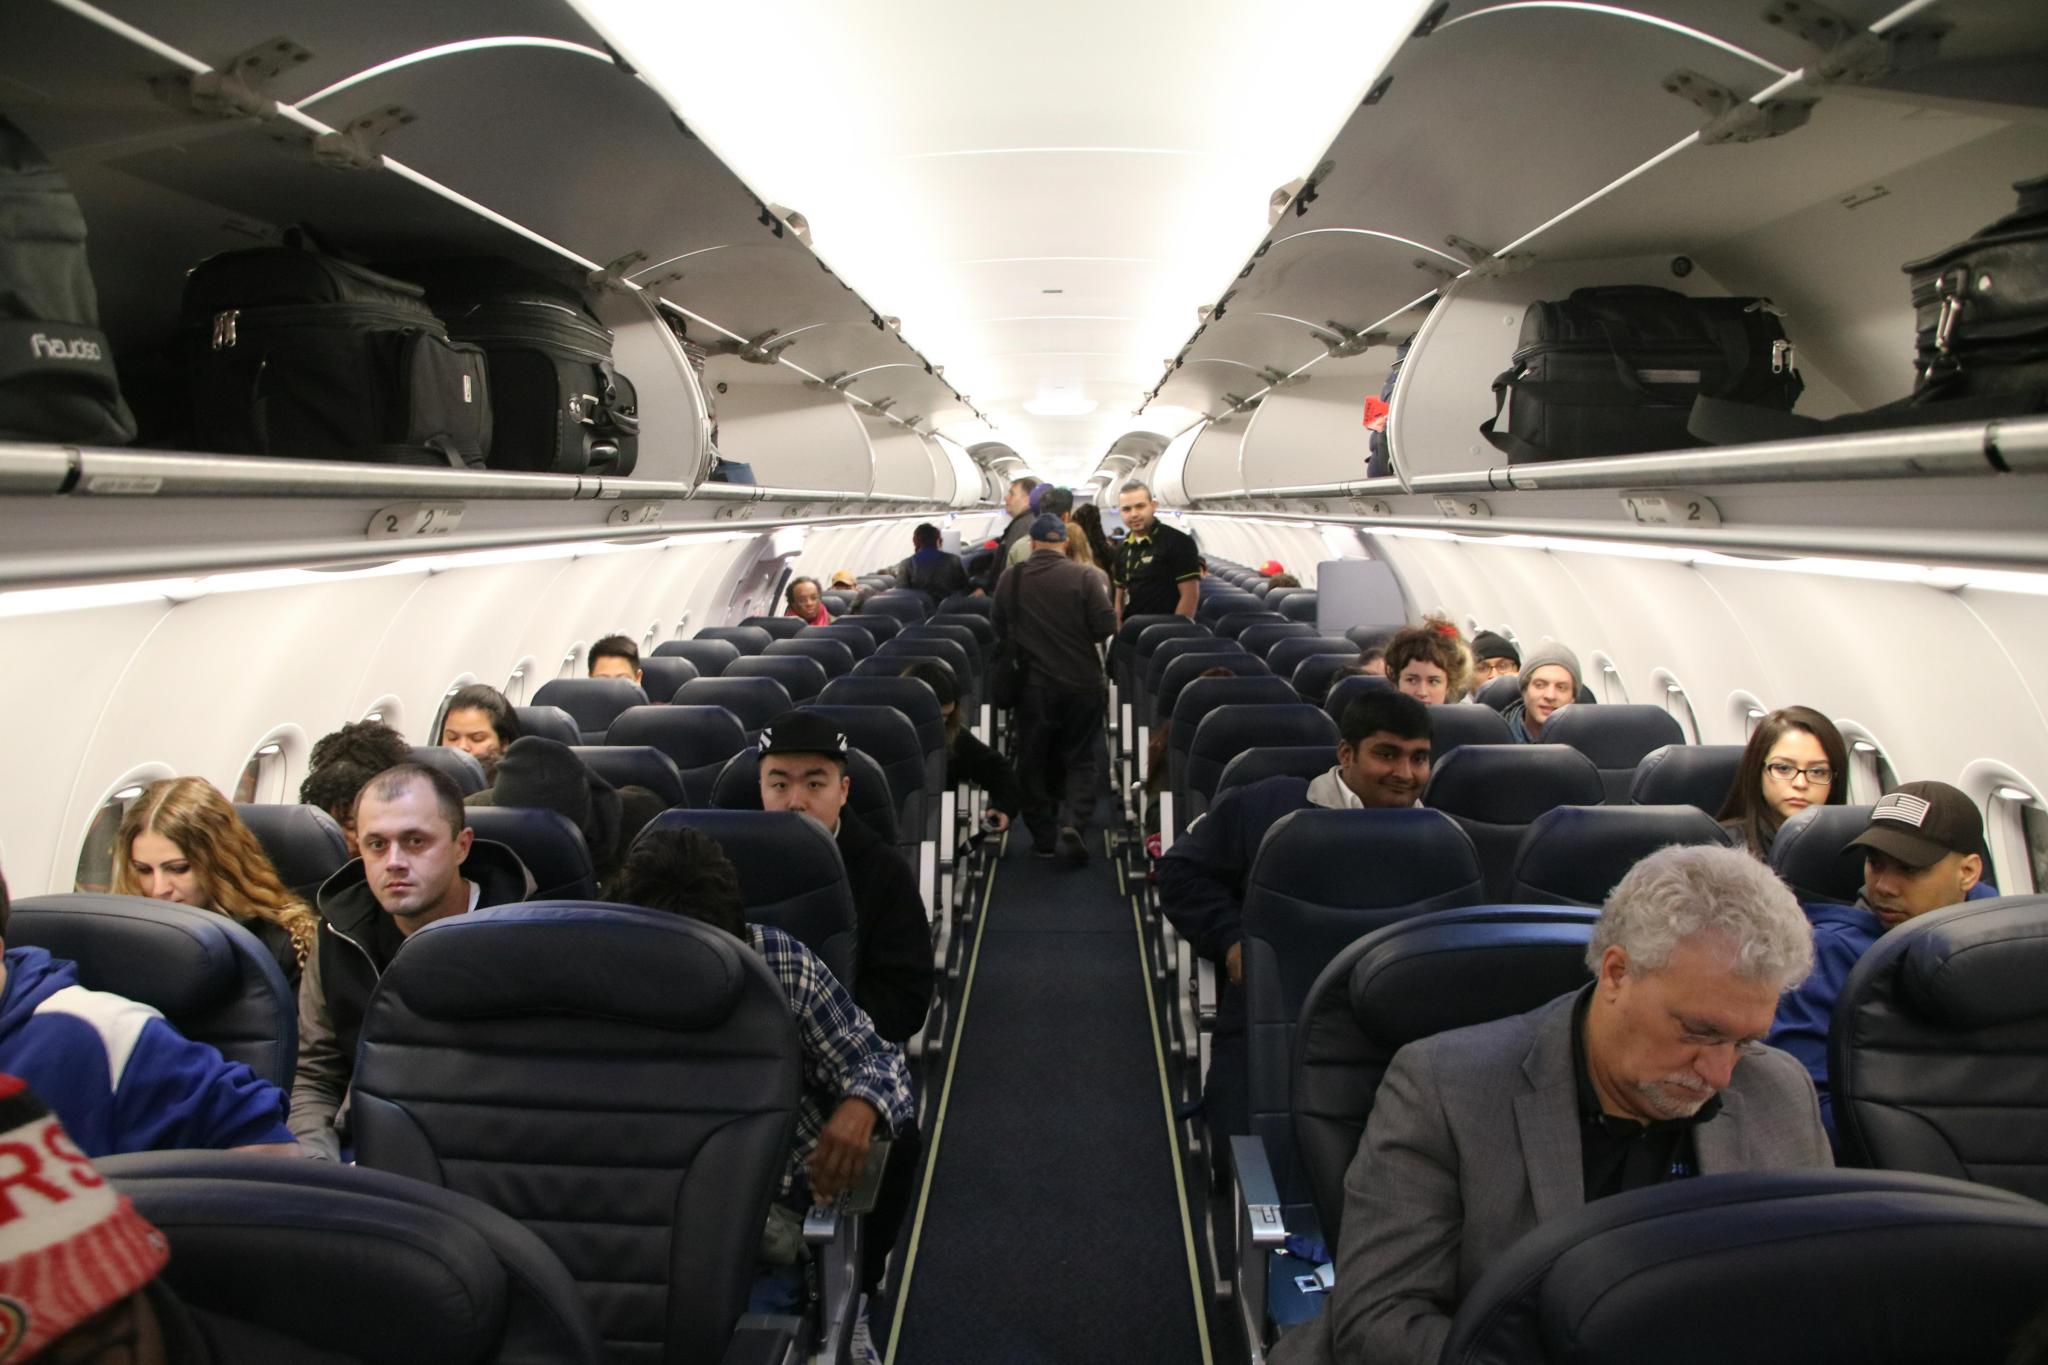 Spirit Airlines Airbus A321 200 Economy Cabin Interior and Seats Layout Configuration